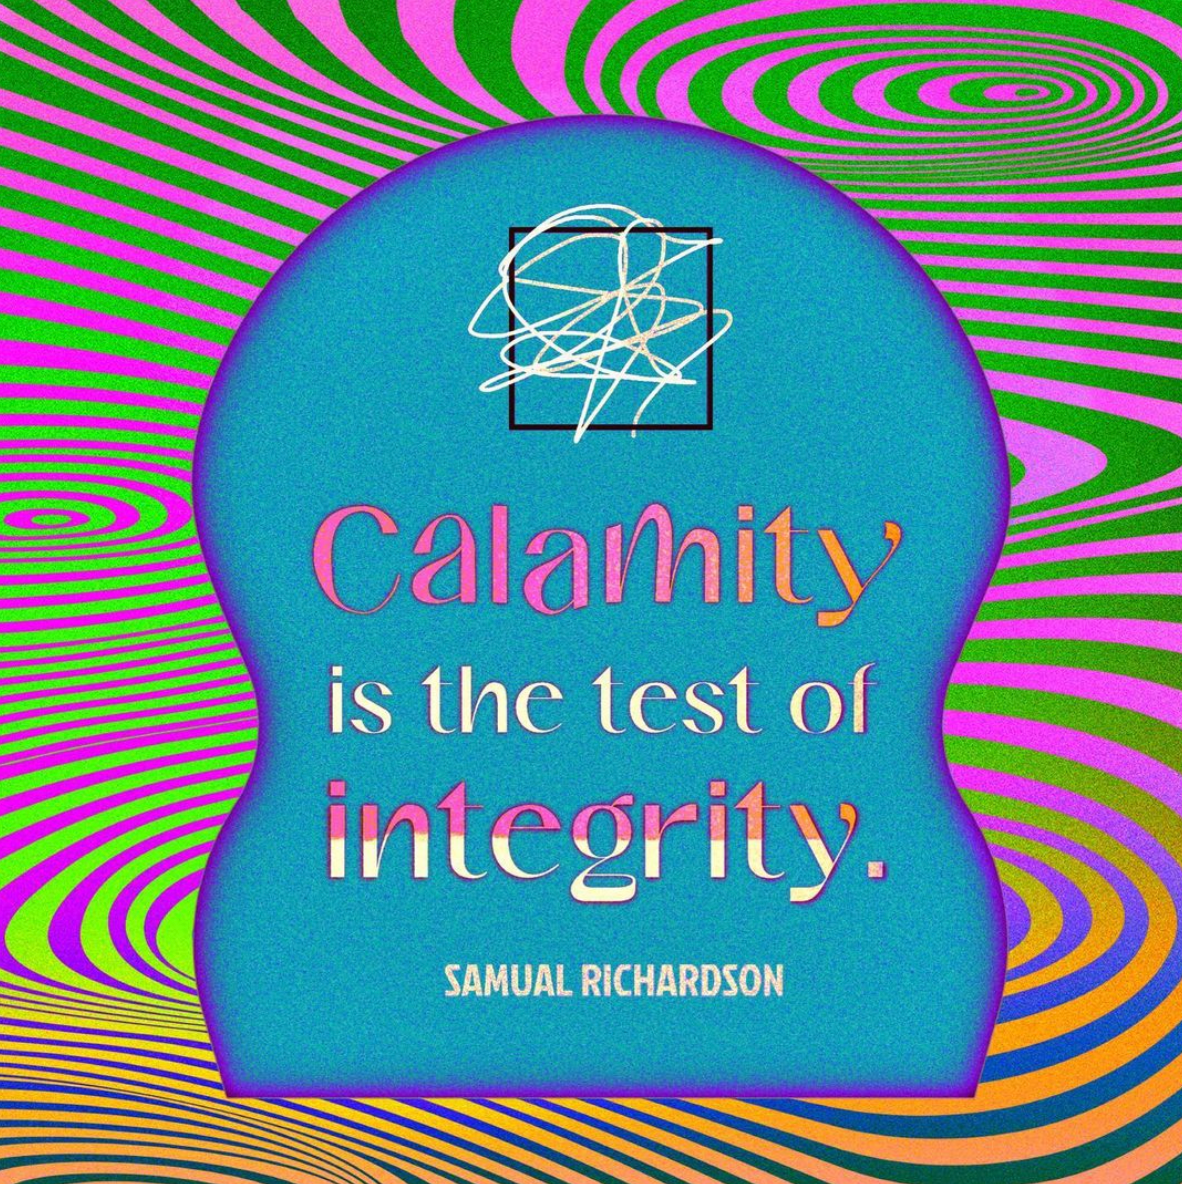 Multicolored illusion art with quote "Calamity is the test of integrity" by Samual Richardson with icon of a square with a scribble over it.